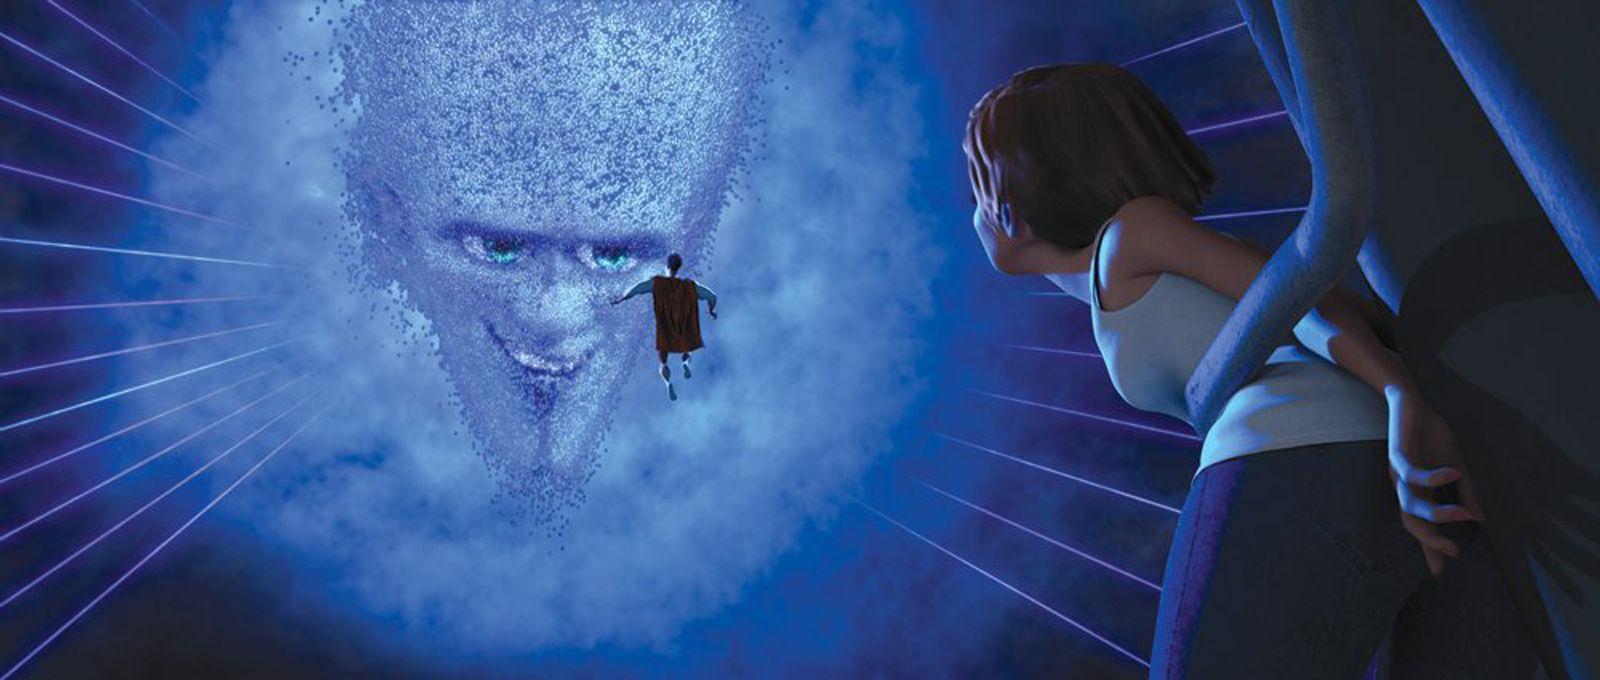 Central Wallpaper: Megamind 3D Movies Poster and HD Wallpaper